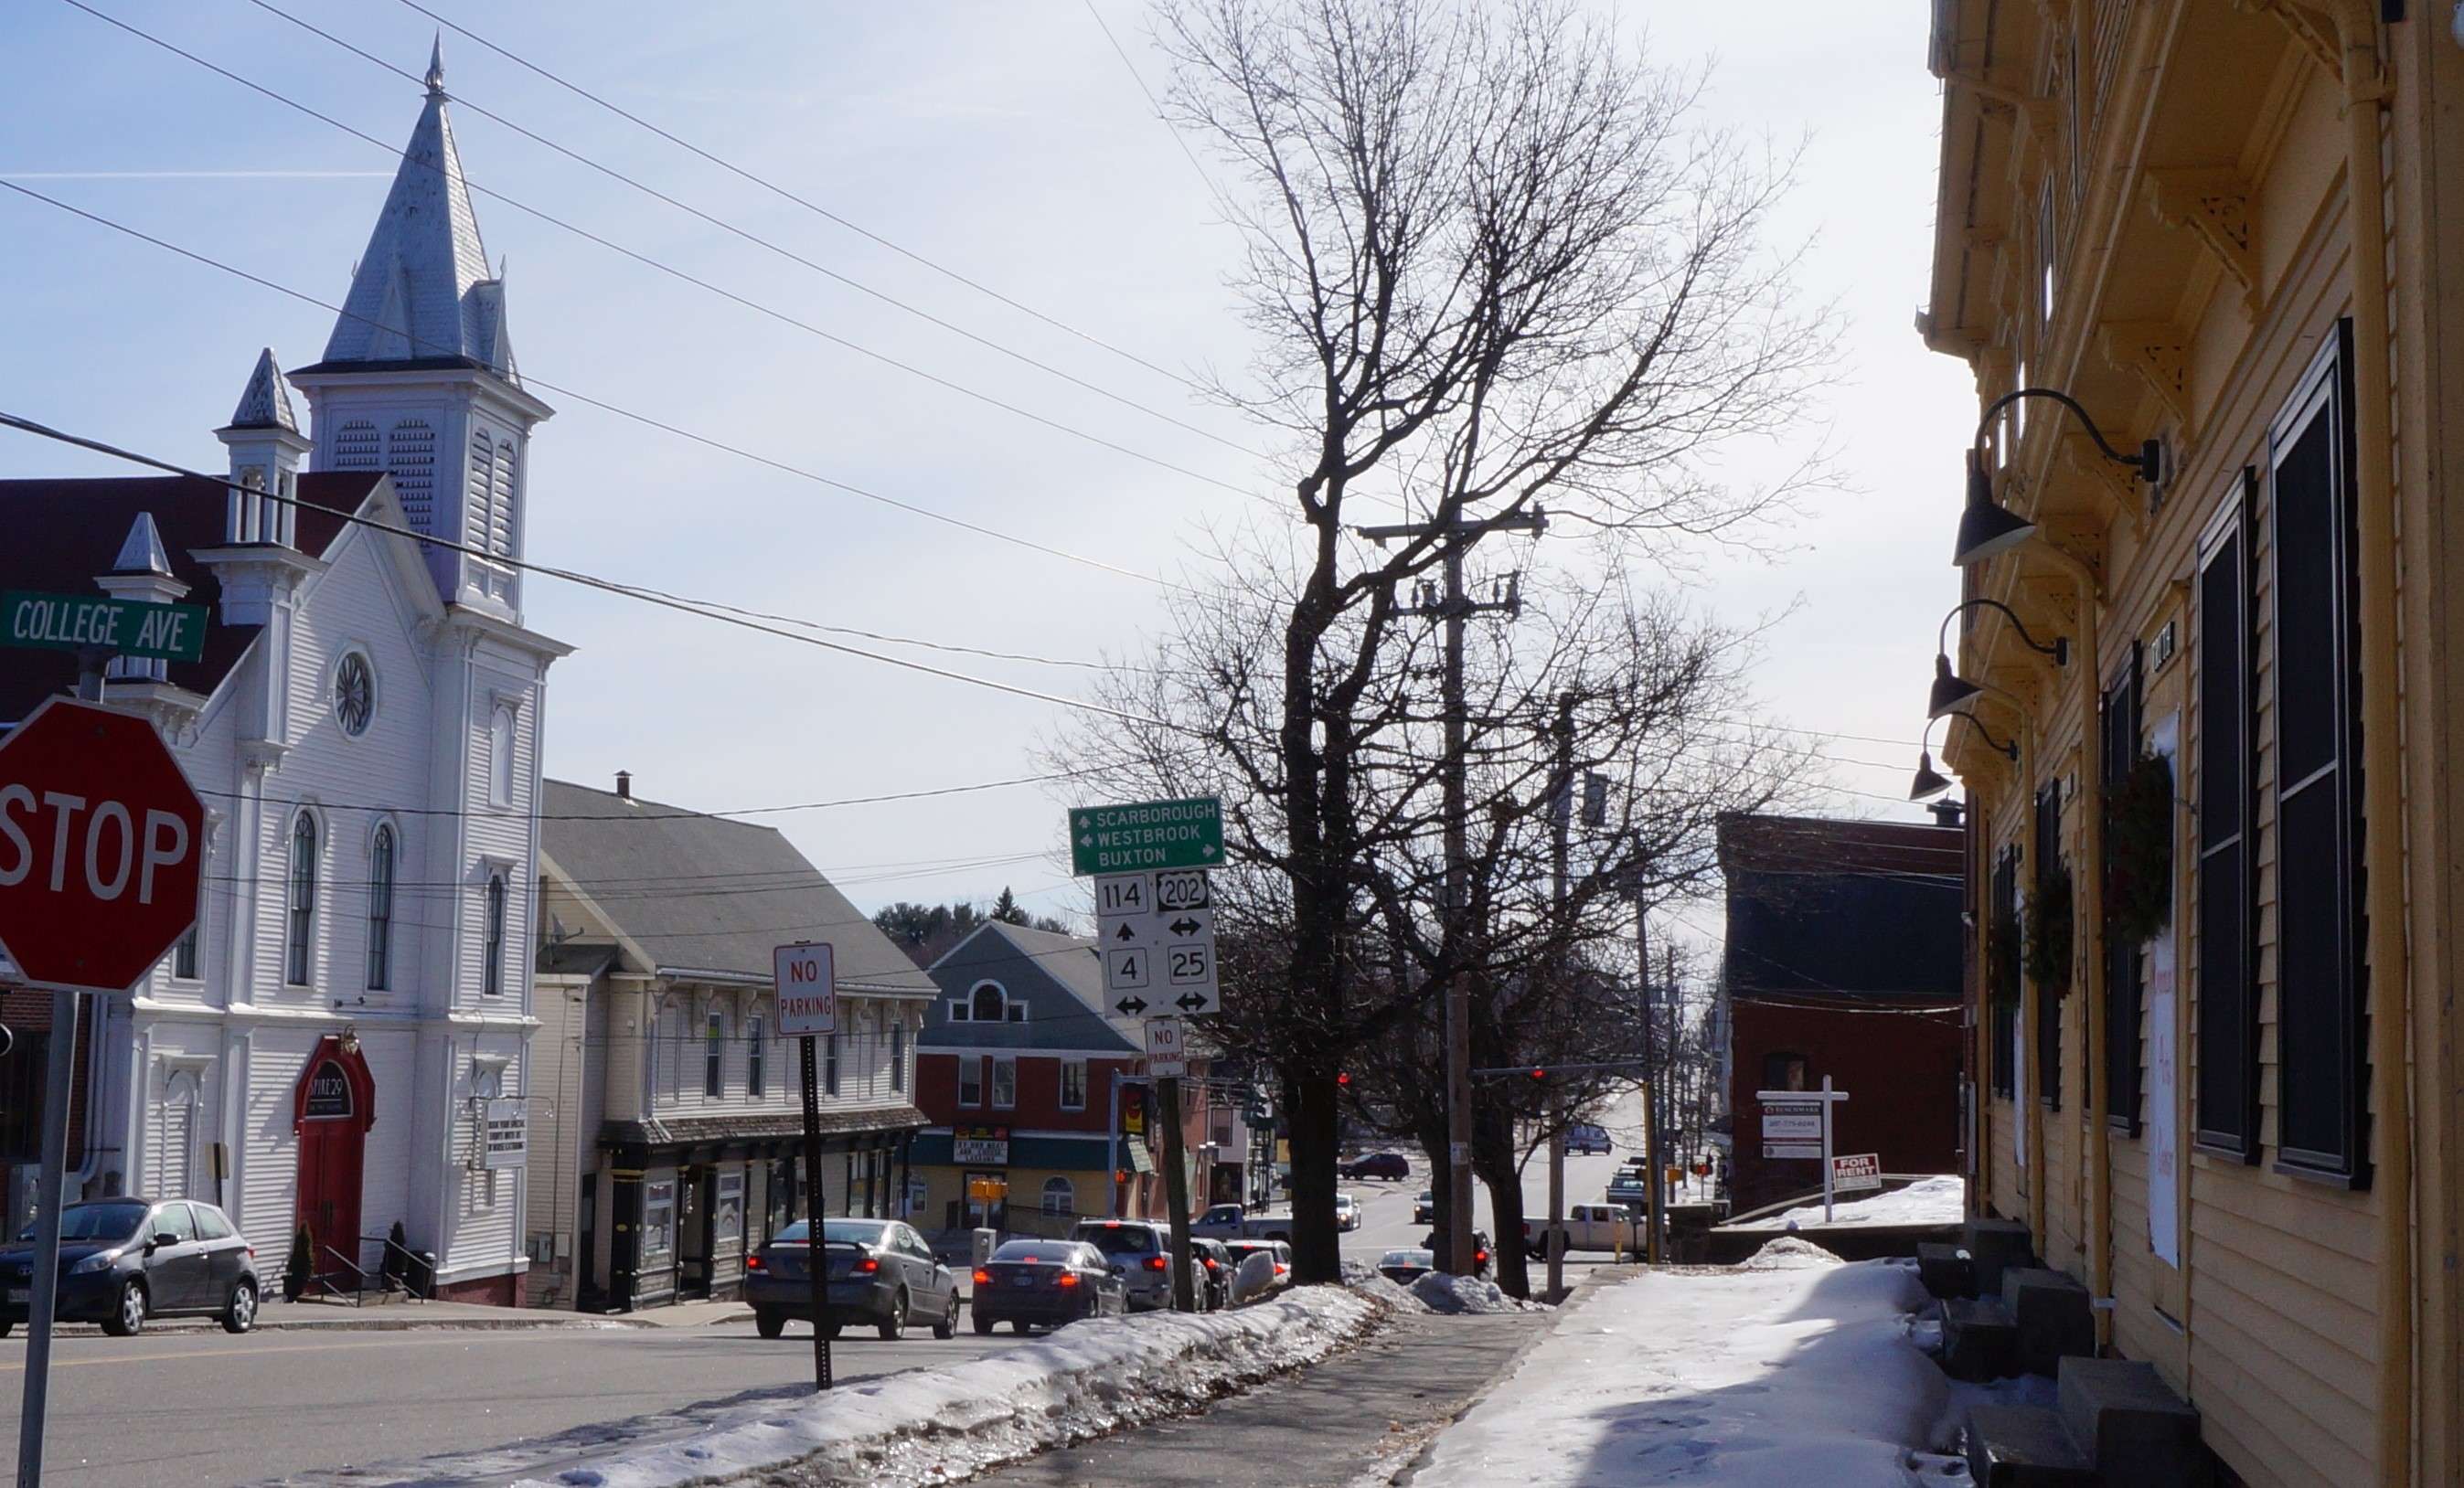 A main street with a white steepled church older clapboard and brick buildings melting dirty snow and a line of cars at a red light at an intersection that shows signs for routes 114, 202, 4 and 25